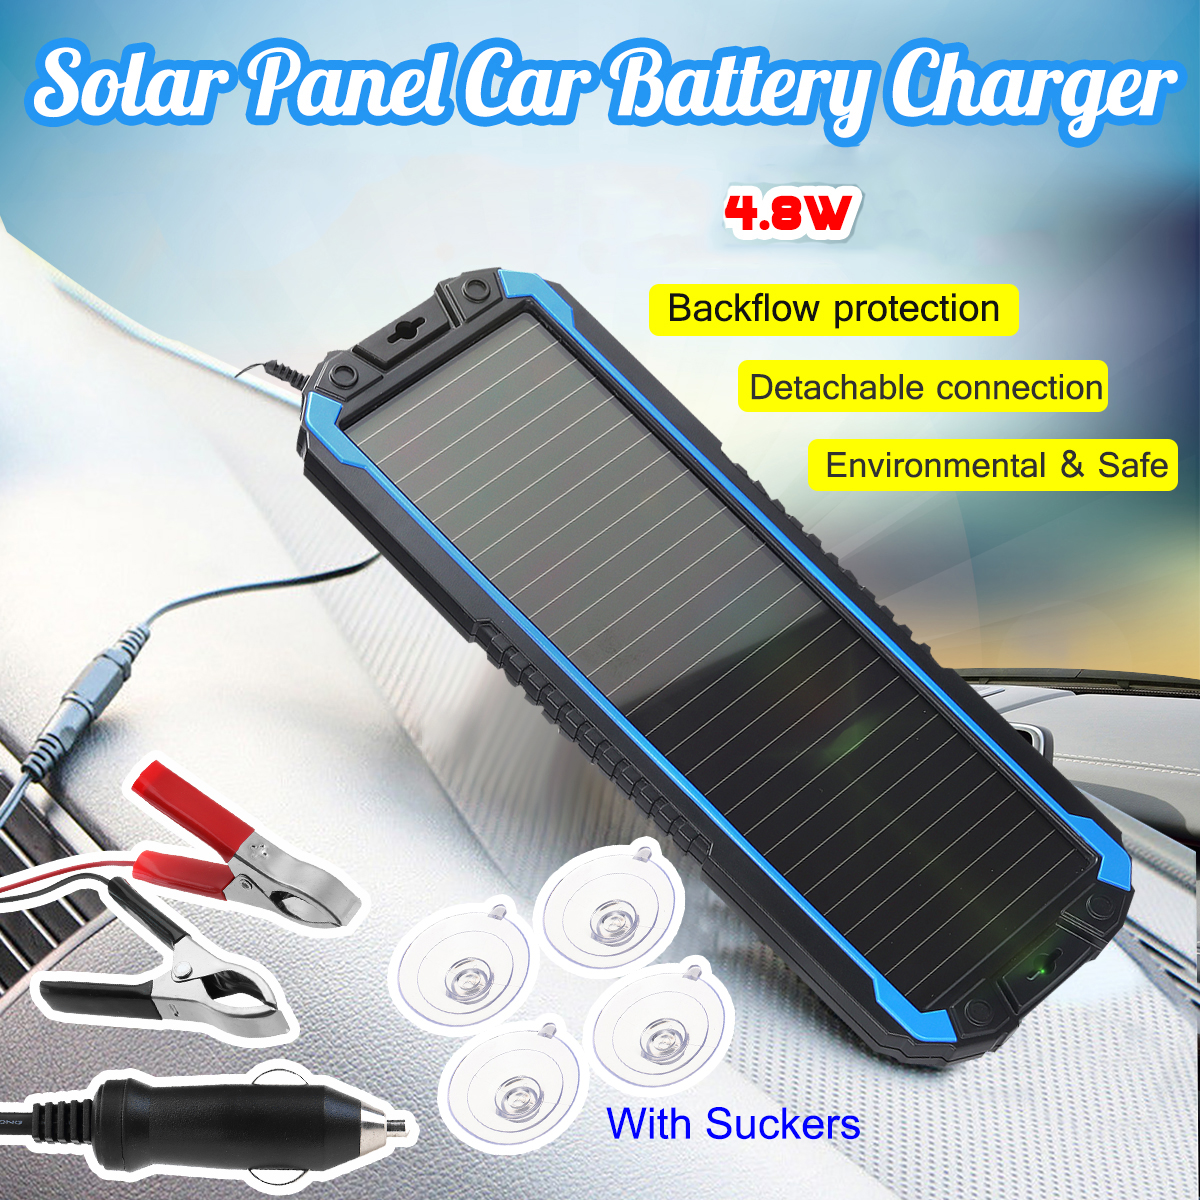 48W-18V-Portable-Solar-Panel-Power-Battery-Charger-Backup-for-Automotive-Motorcycle-Boat-Marine-RV-e-1451189-1